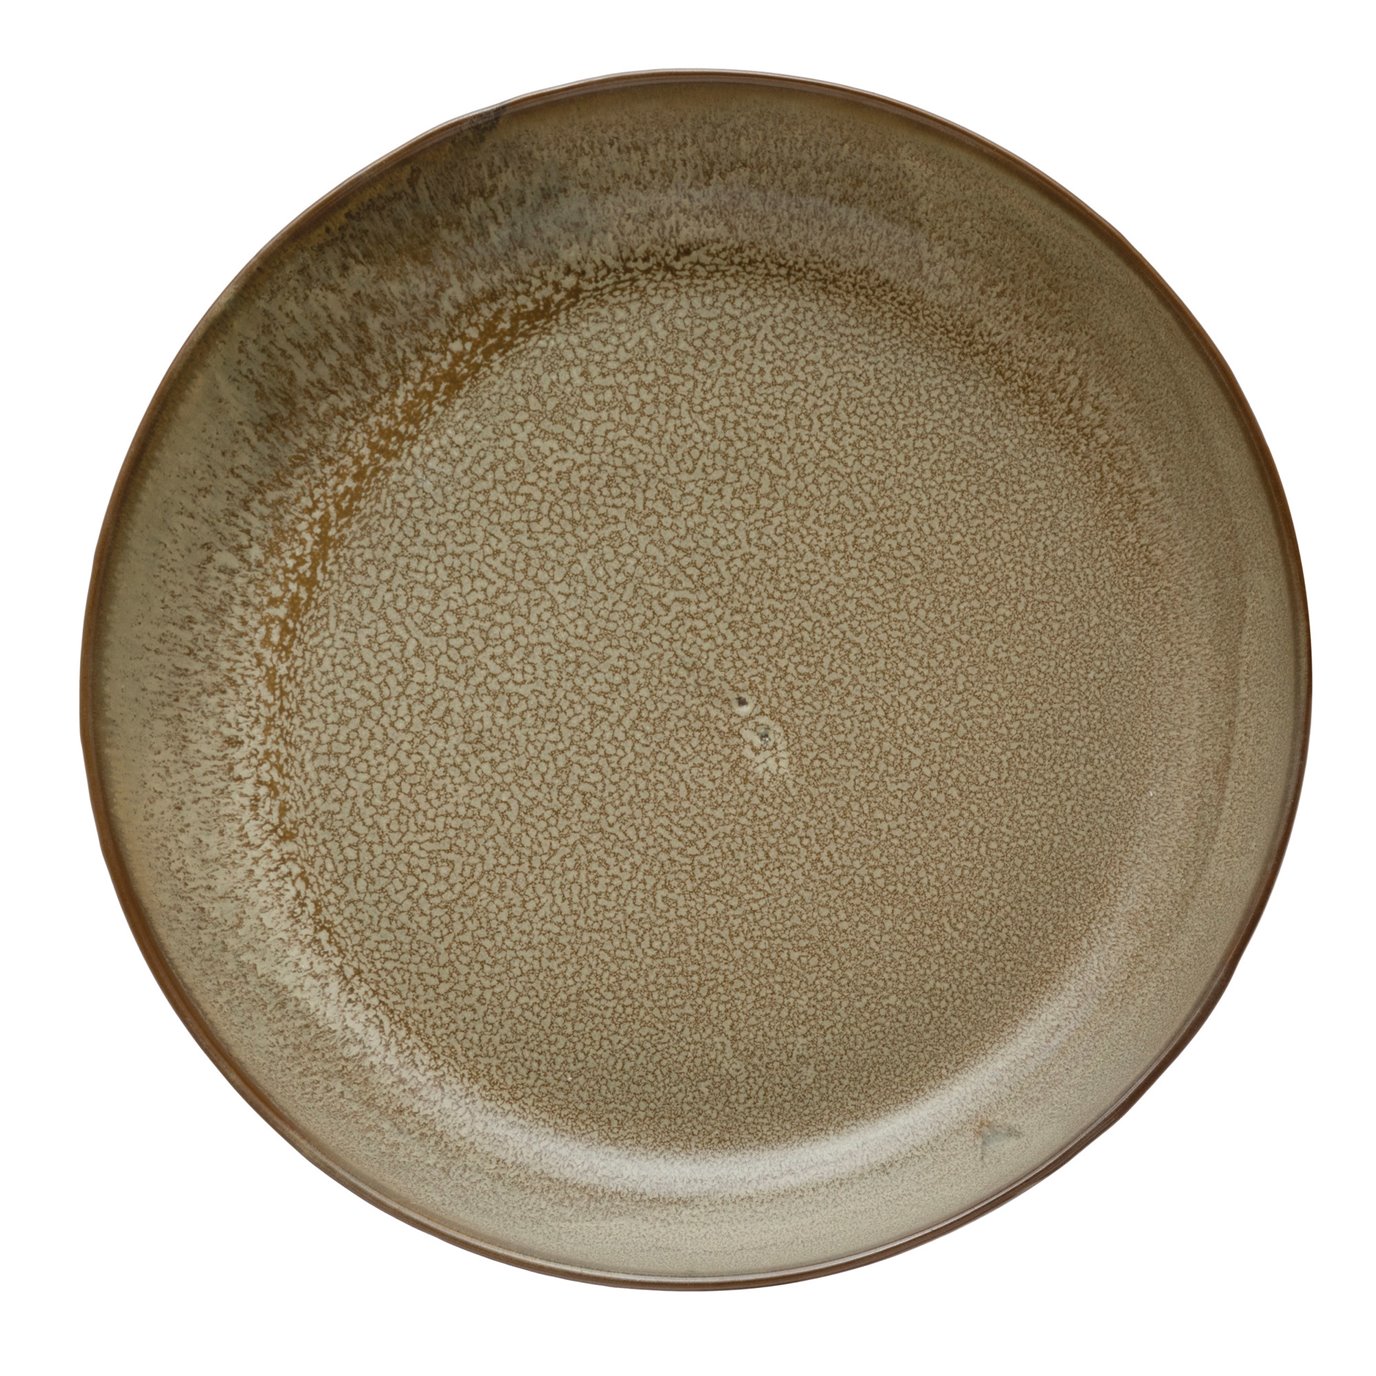 Stoneware Serving Bowl, Reactive Glaze, Brown (Each One Will Vary)